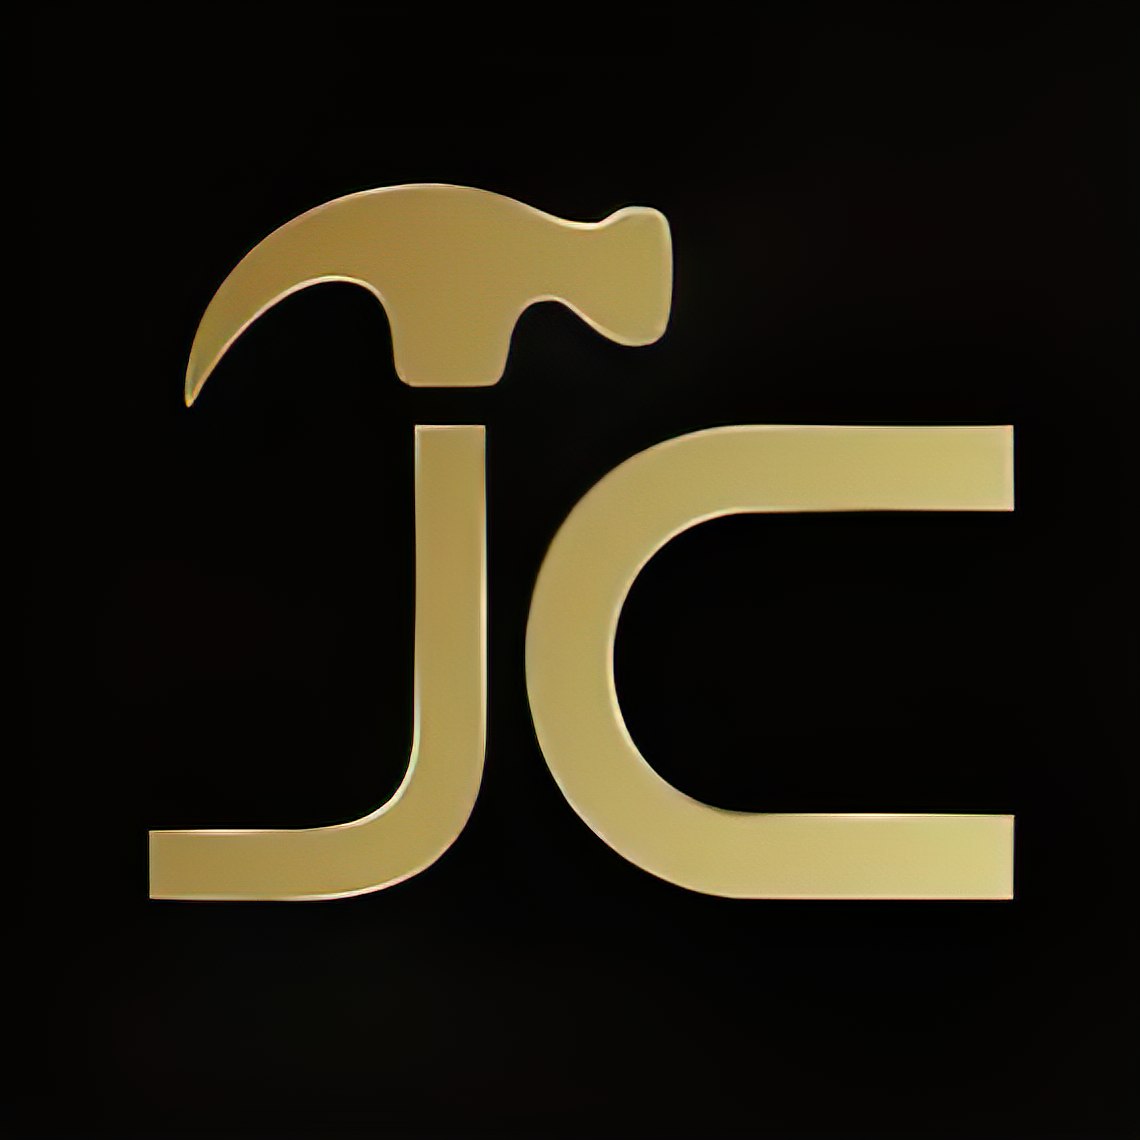 Business logo of JC Construction & Remodeling